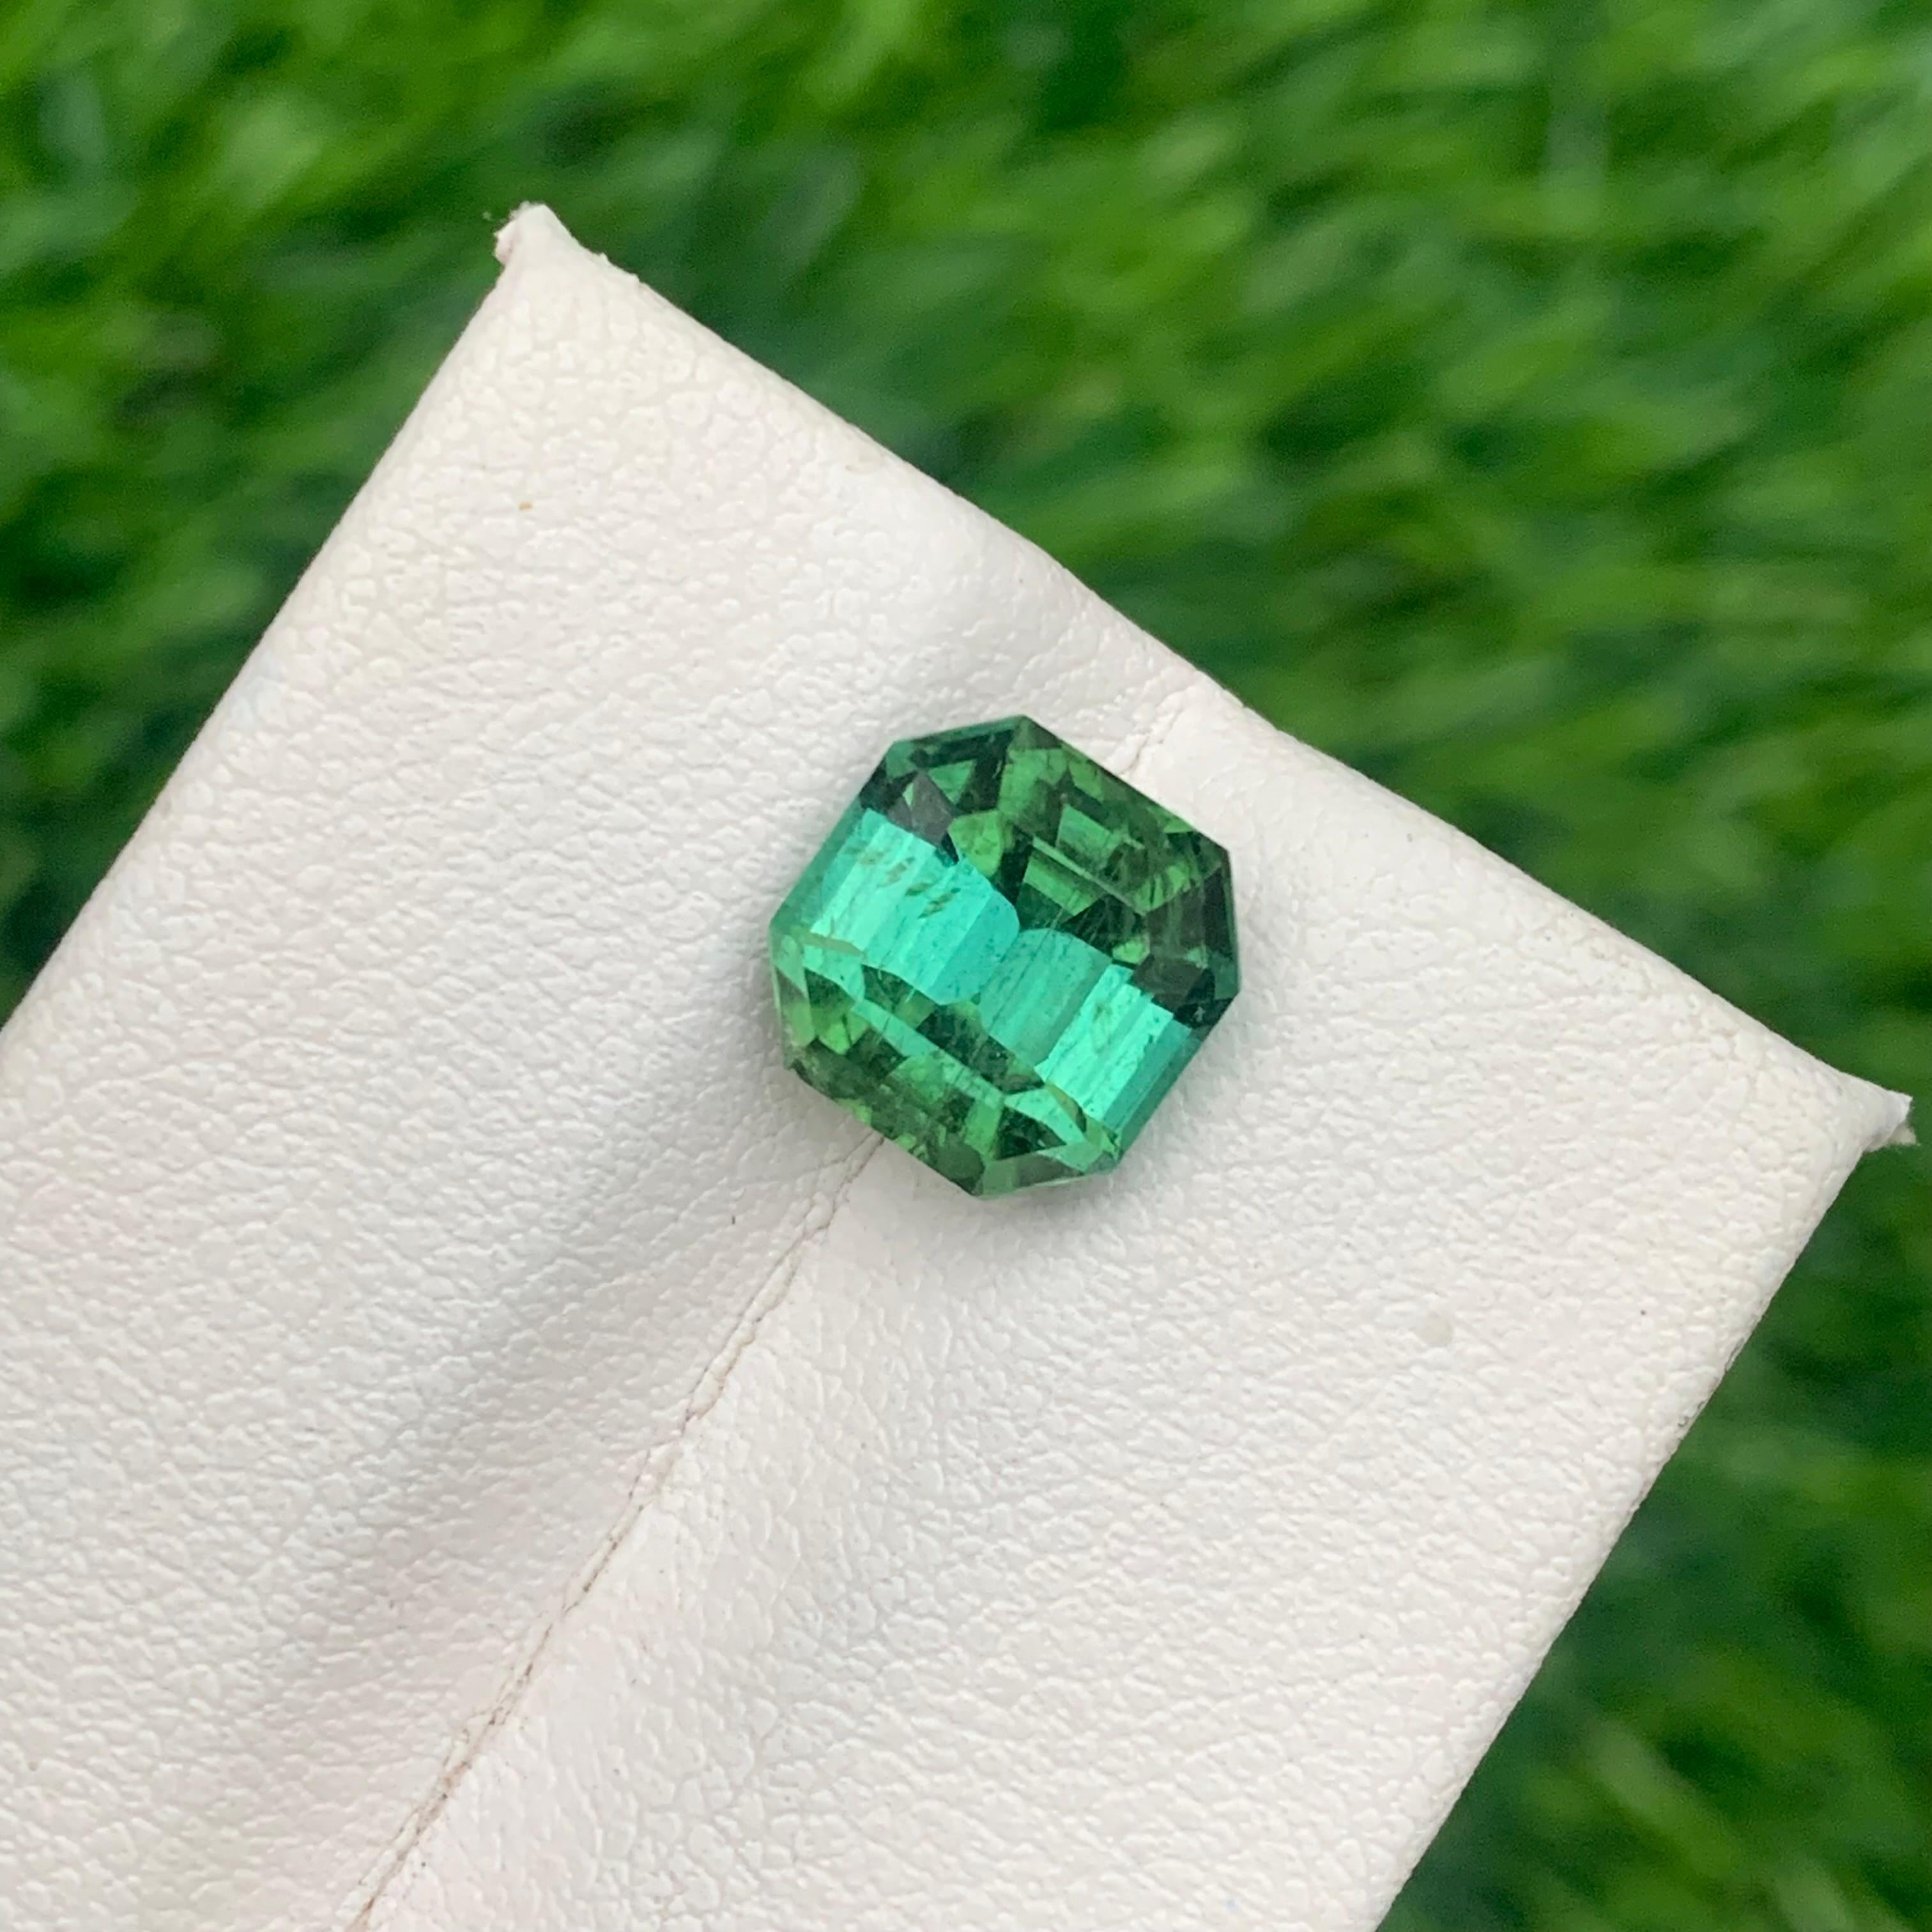 Gemstone Type : Tourmaline
Weight : 4.25 Carats
Dimensions : 8.7x8.6x6.9 Mm
Origin : Kunar Afghanistan
Clarity SI
Shape: Emerald
Color: Mint Greem
Certificate: On Demand
Basically, mint tourmalines are tourmalines with pastel hues of light green to